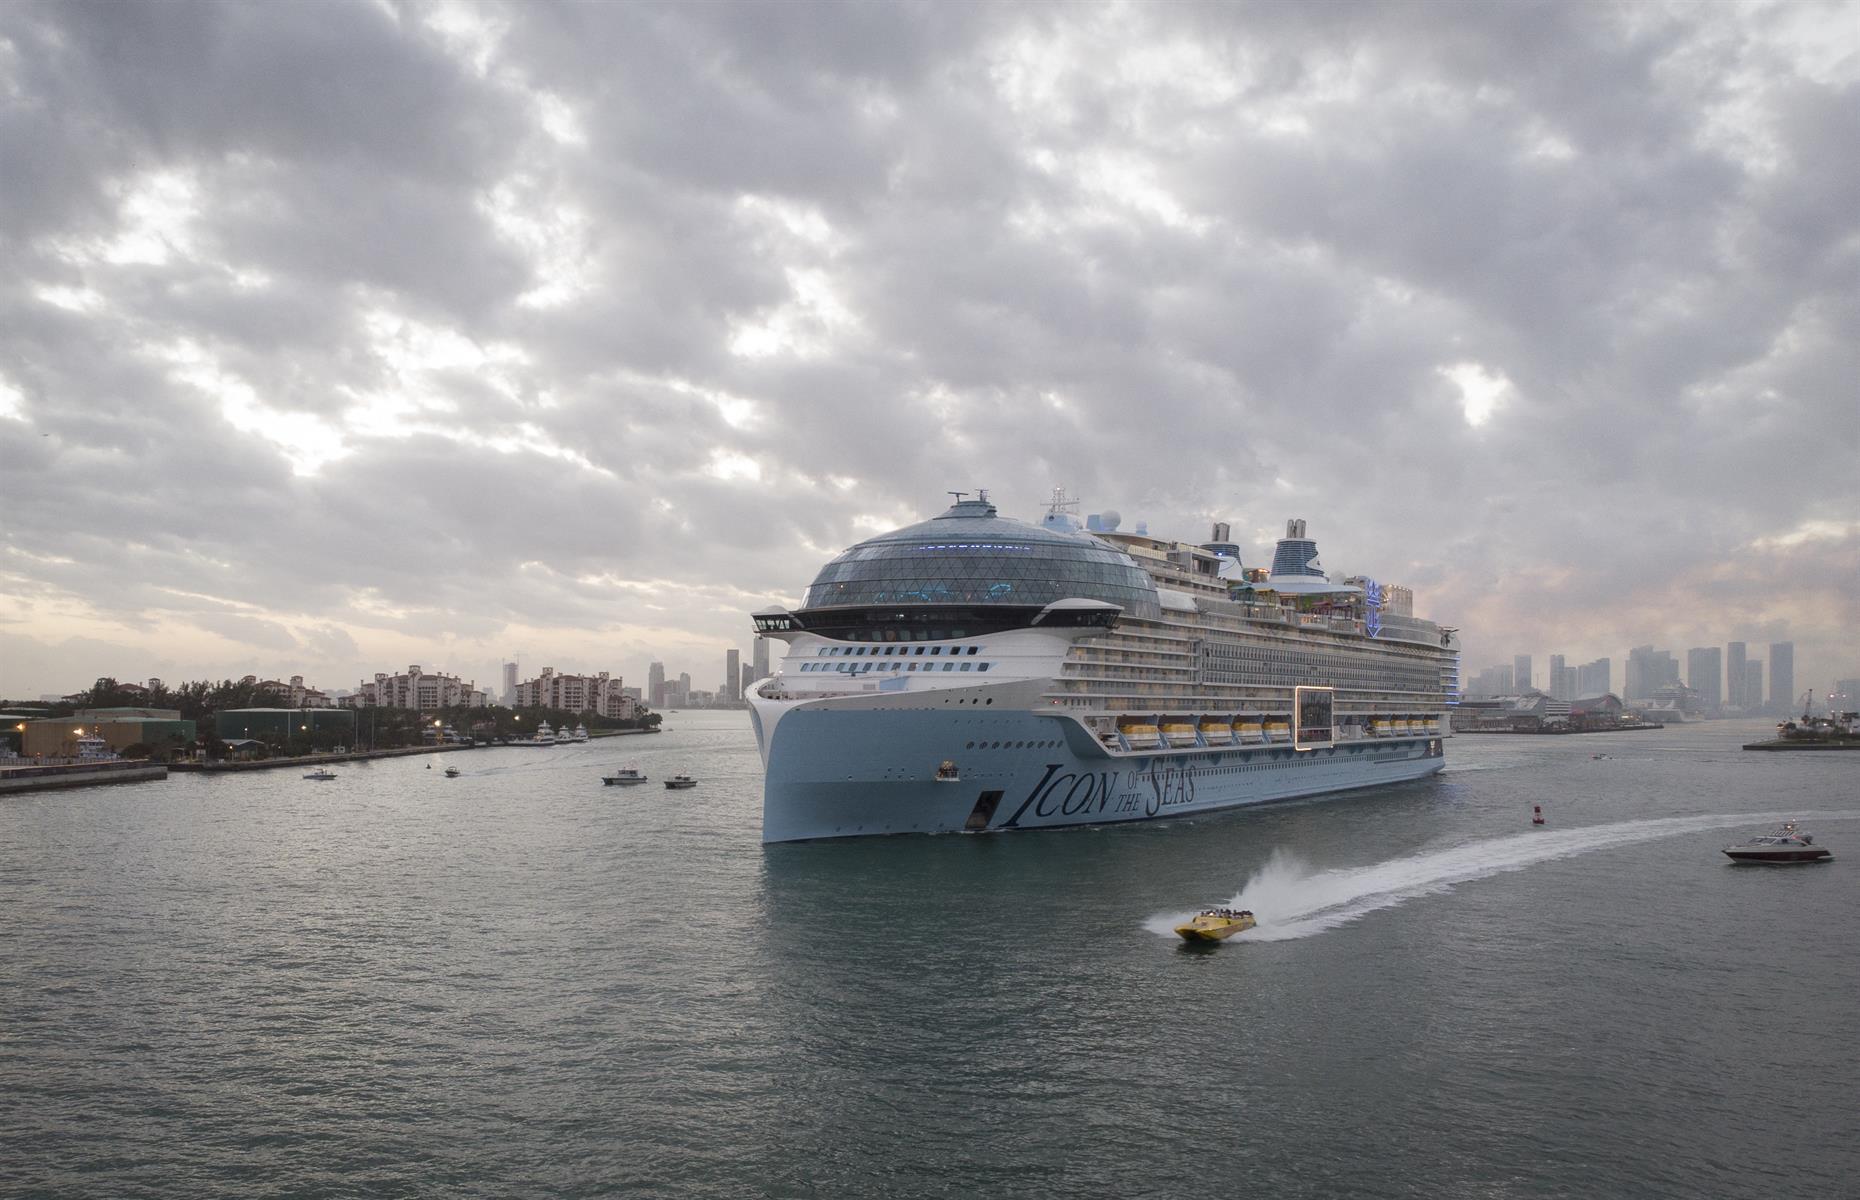 <p>However, critics have argued that using LNG as fuel contributes to emissions of methane, a harmful greenhouse gas.</p>  <p>Bryan Comer, director of the International Council on Clean Transportation’s marine program, told <em>The Guardian</em>: "[Royal Caribbean] is doubling down by calling LNG a green fuel when the engine is emitting 70 to 80% more greenhouse gas emissions per trip than if it used regular marine fuel. Icon has the largest LNG tanks ever installed in a ship. It is greenwashing.”</p>  <p><strong>Liked this? Click on the Follow button above for more great stories from loveEXPLORING</strong></p>